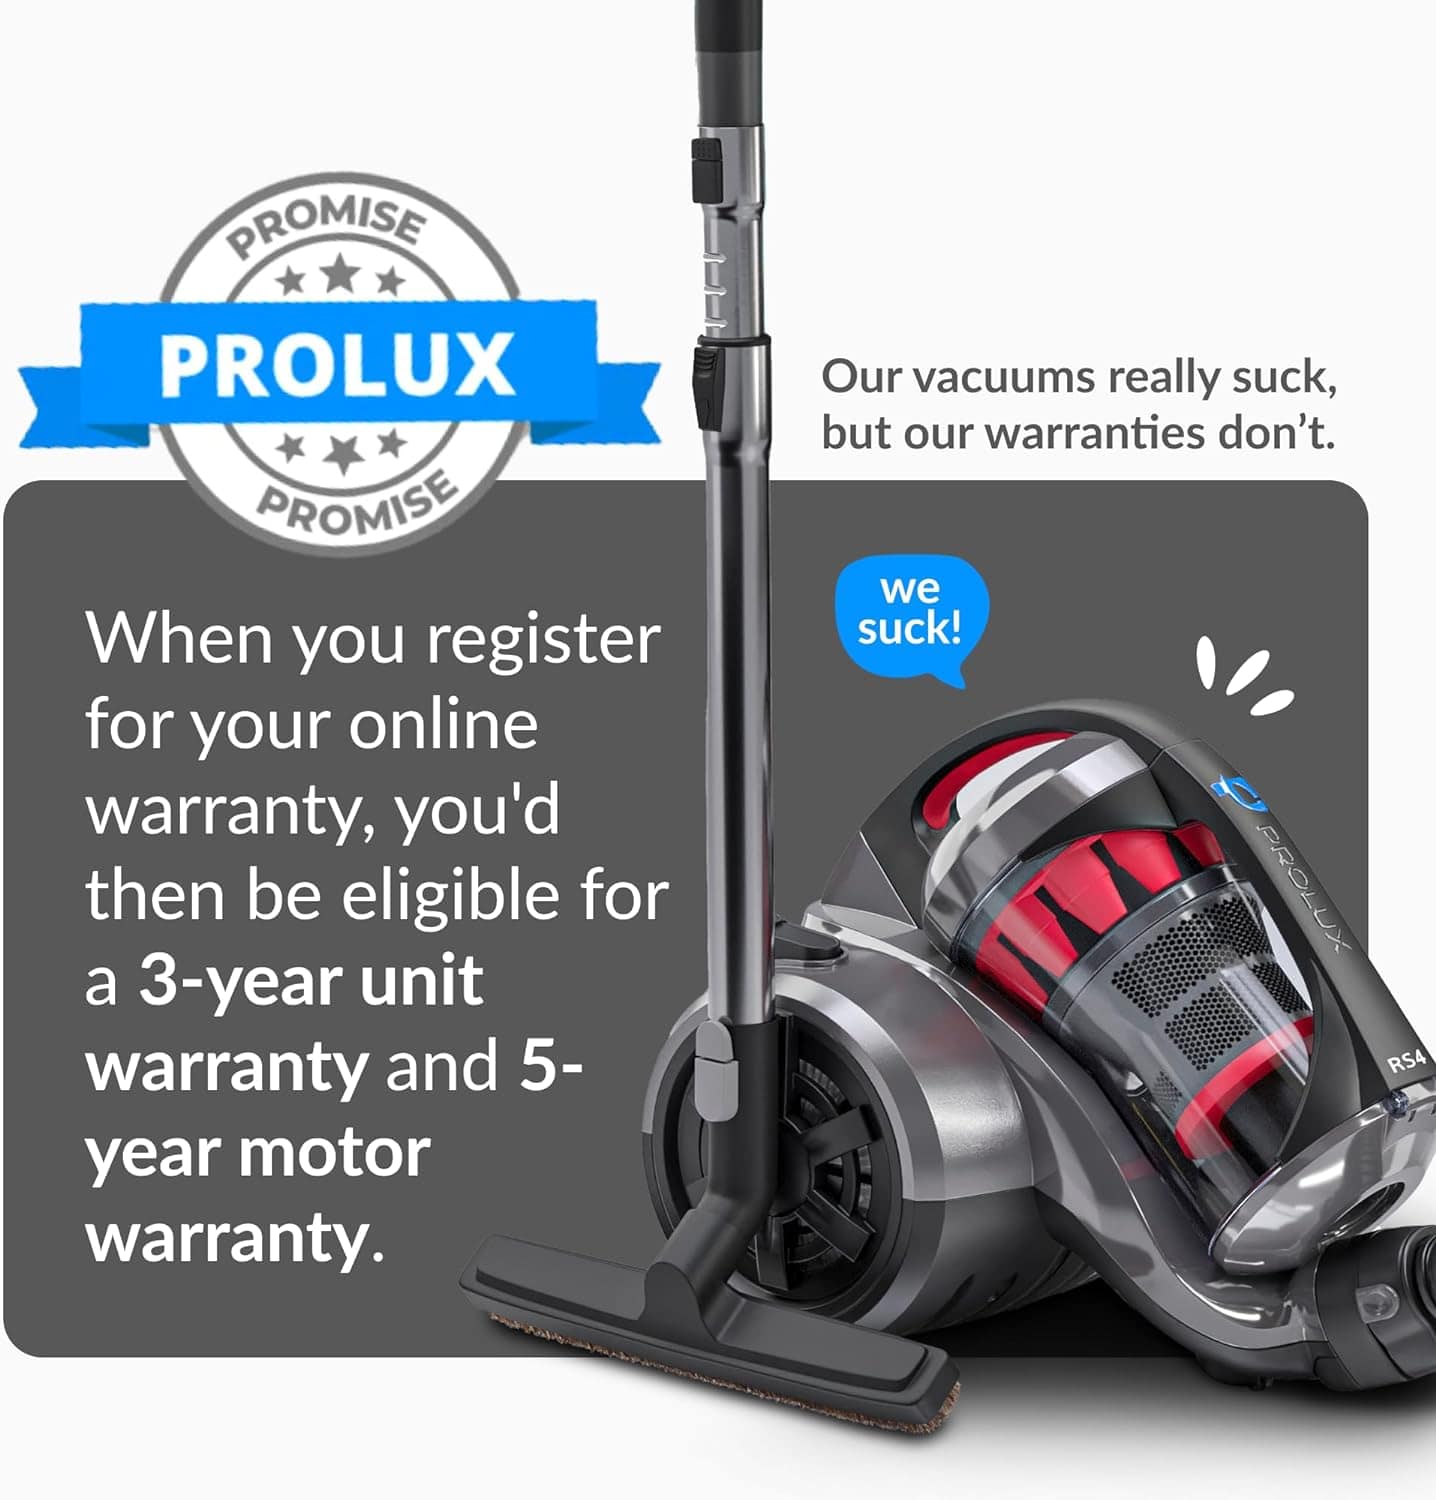 Prolux RS4 Lightweight Bagless Canister Vacuum with HEPA Filtration Premium Button Lock Tools and Automatic Cord Rewind